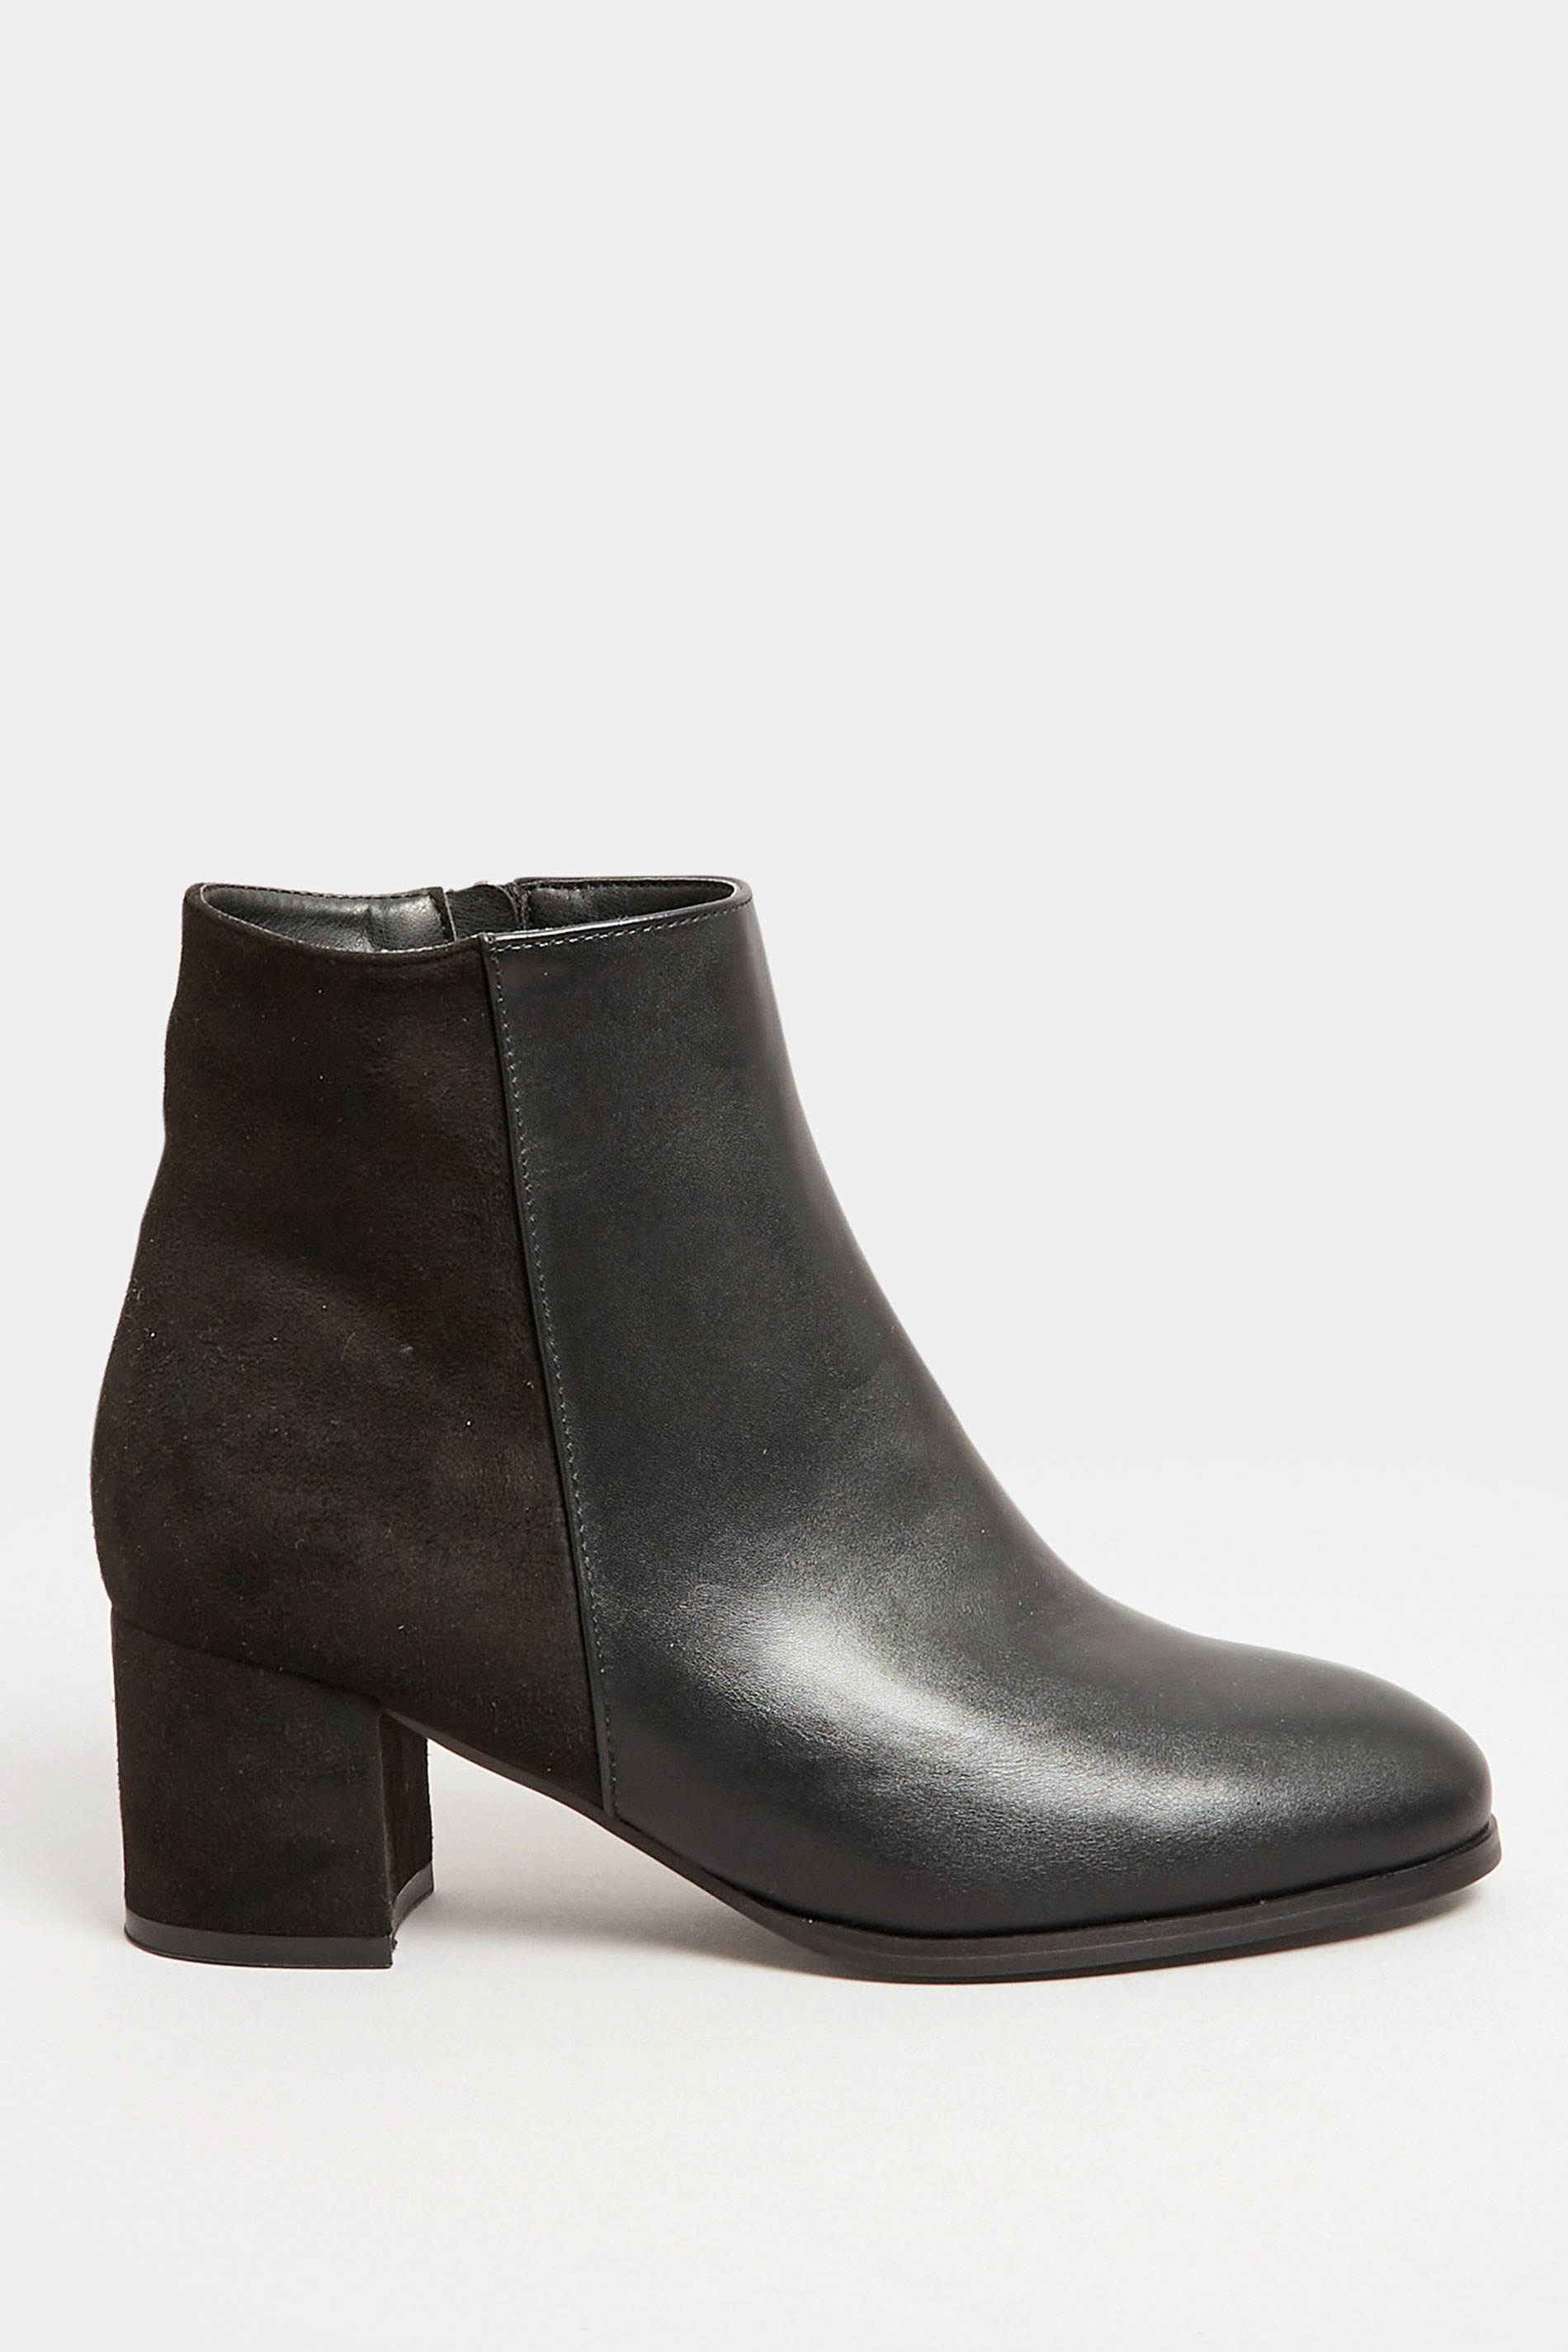 Black Faux Leather Heeled Ankle Boots in E Fit & EEE Fit 3